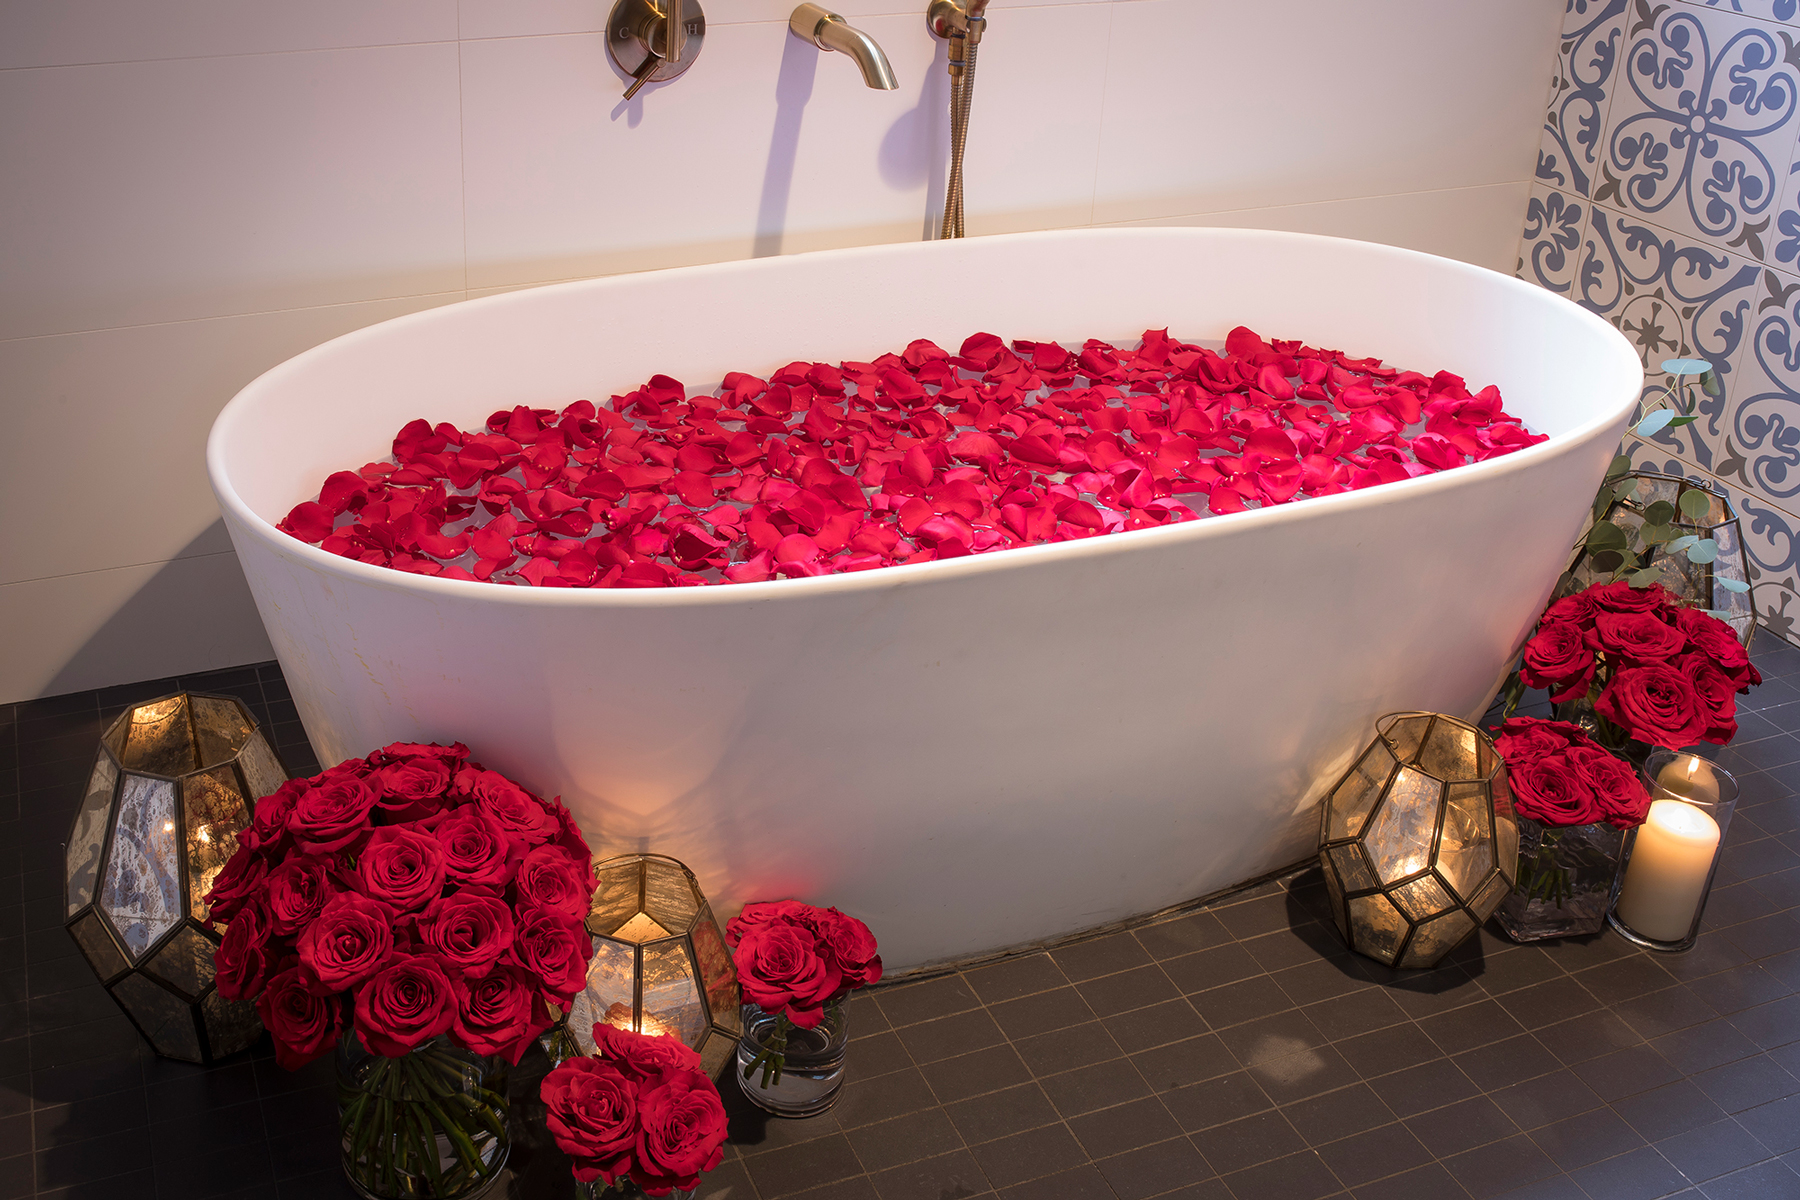 Bathtub filled with rose petals in heart shape  Bath romantic, Romantic  bedroom decor, Romantic bath